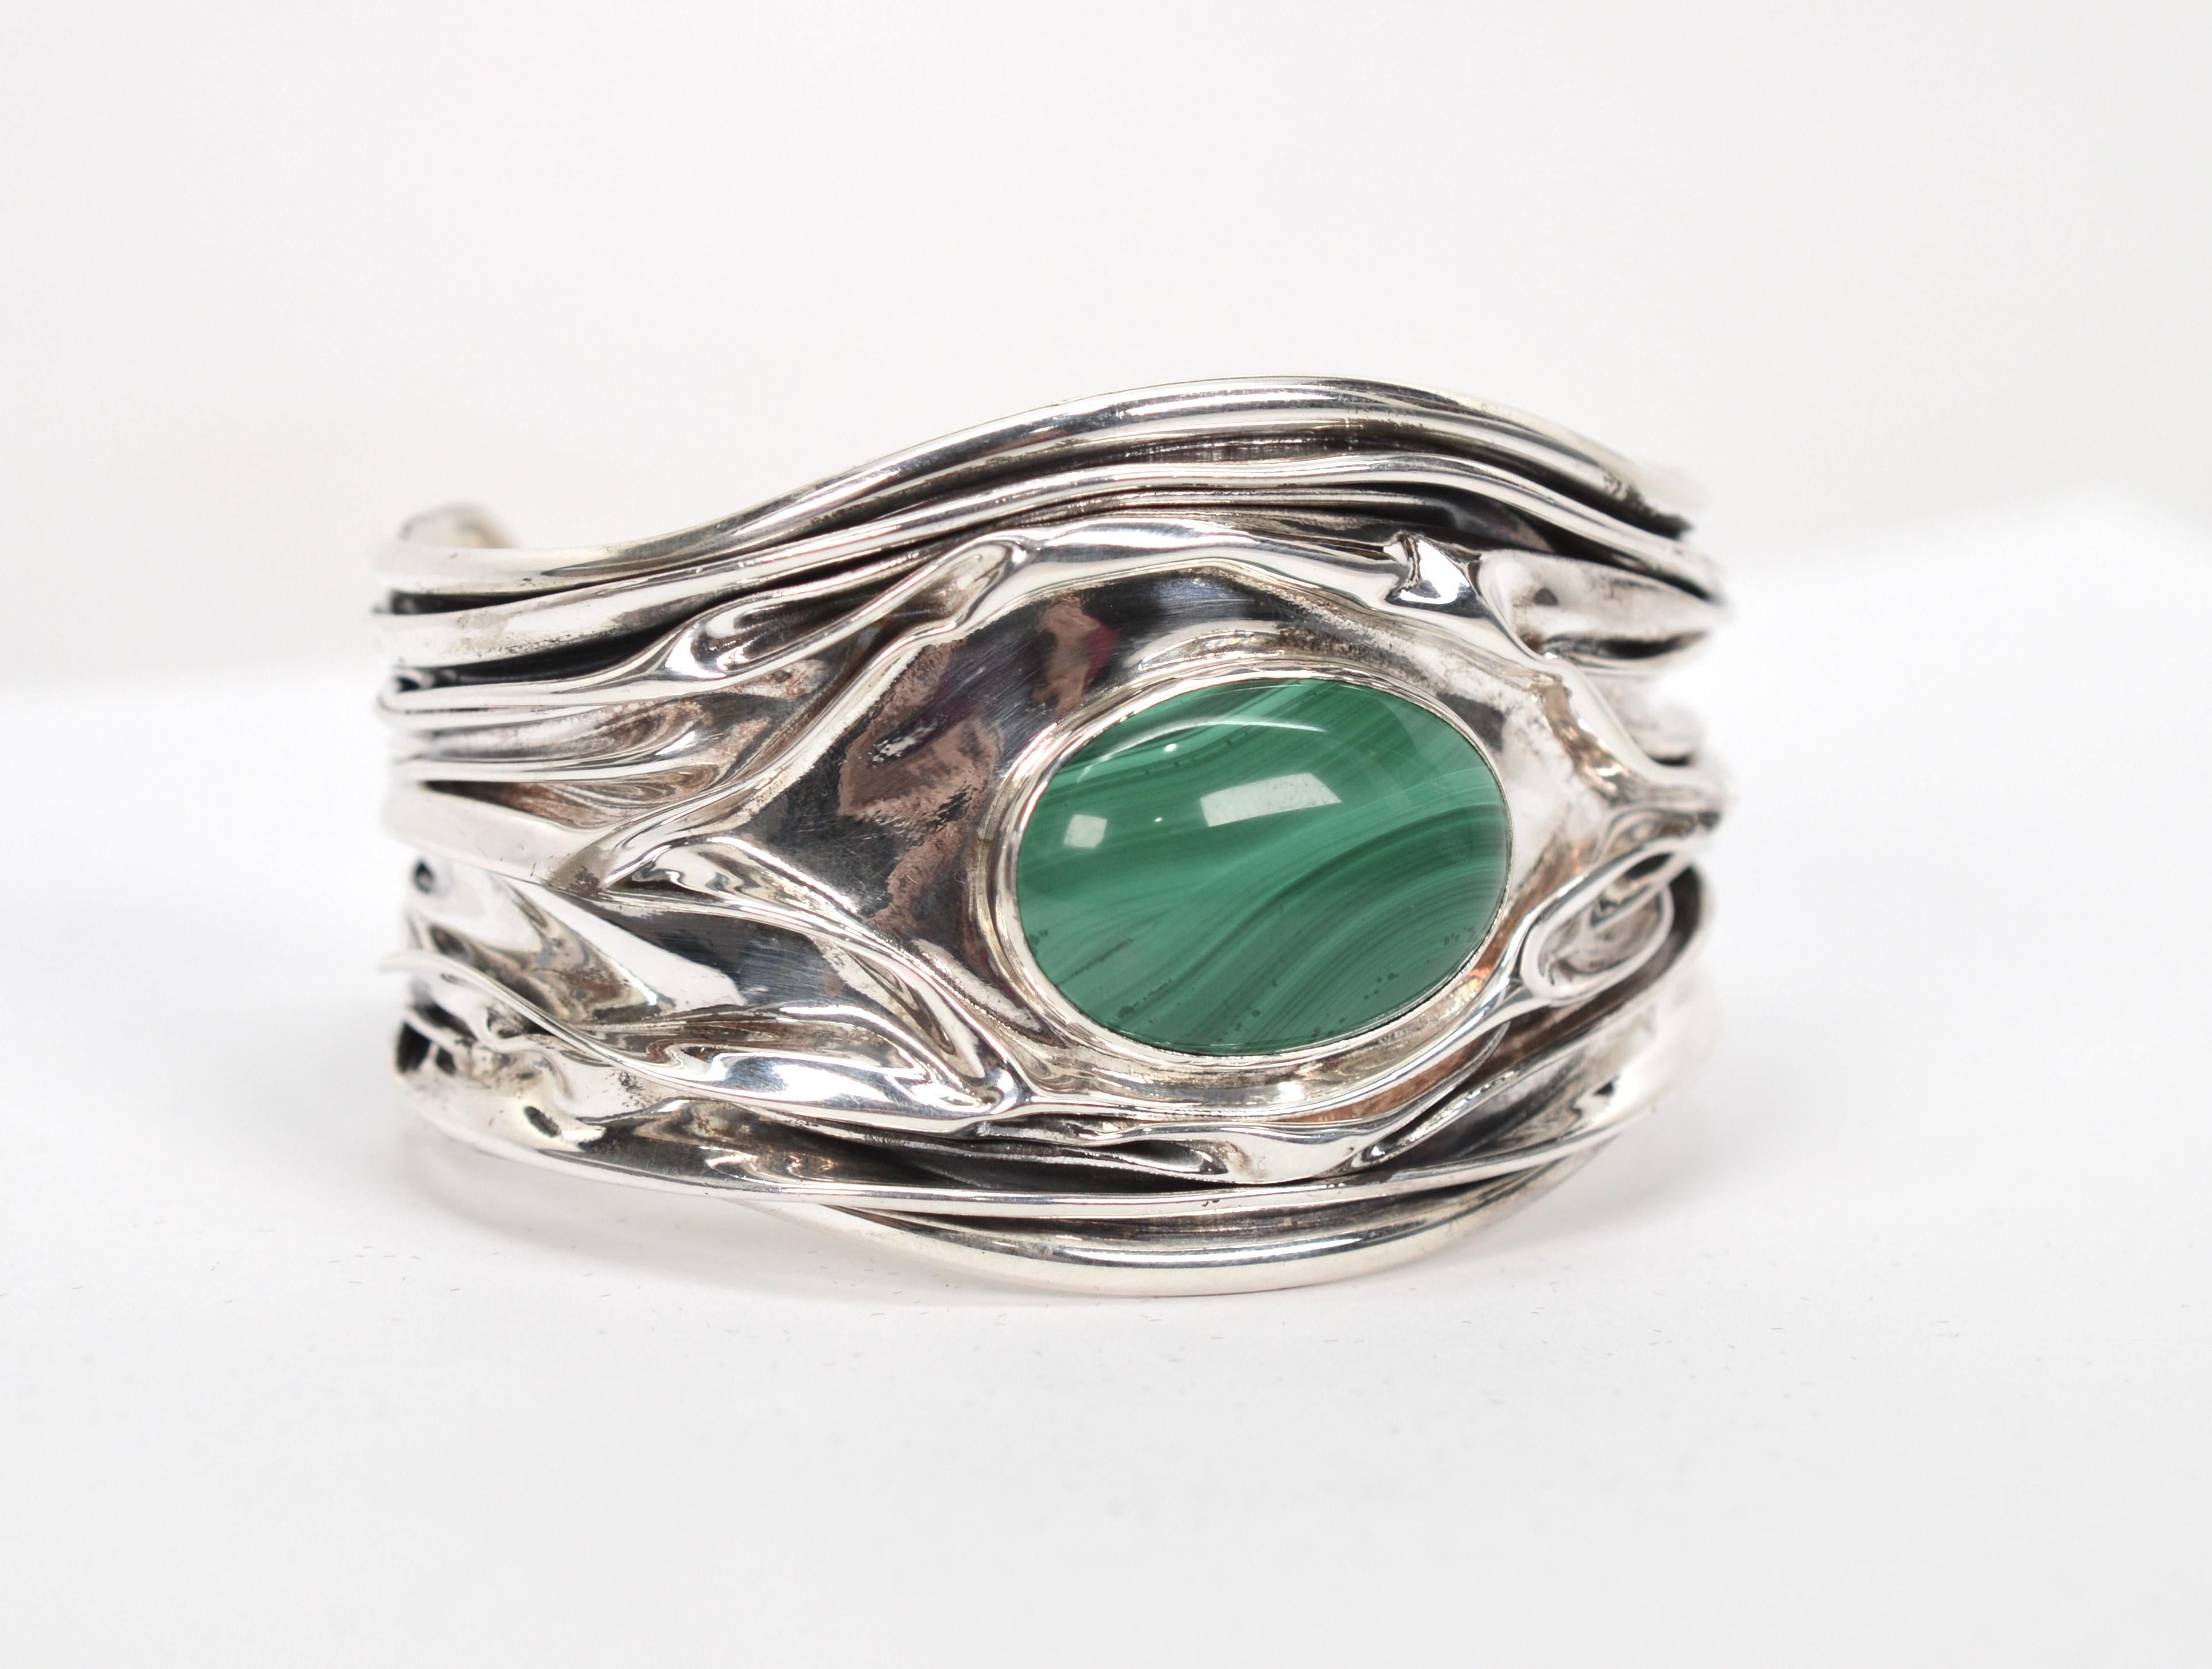 Malachite Modernist Sterling Silver Cuff Bracelet In Excellent Condition For Sale In Mount Kisco, NY